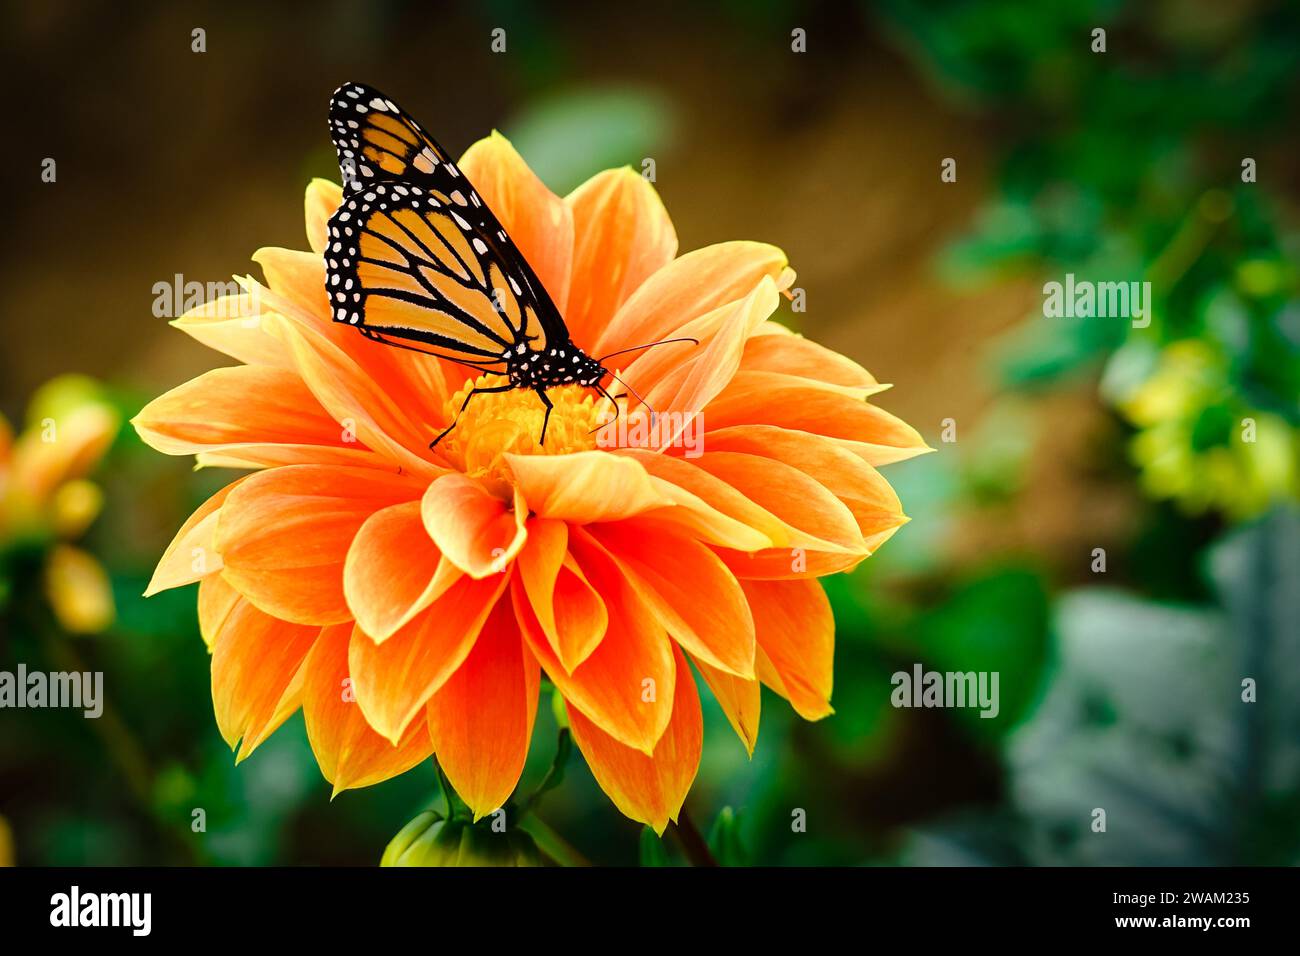 Colorful butterfly on an orange flower with green background Stock Photo